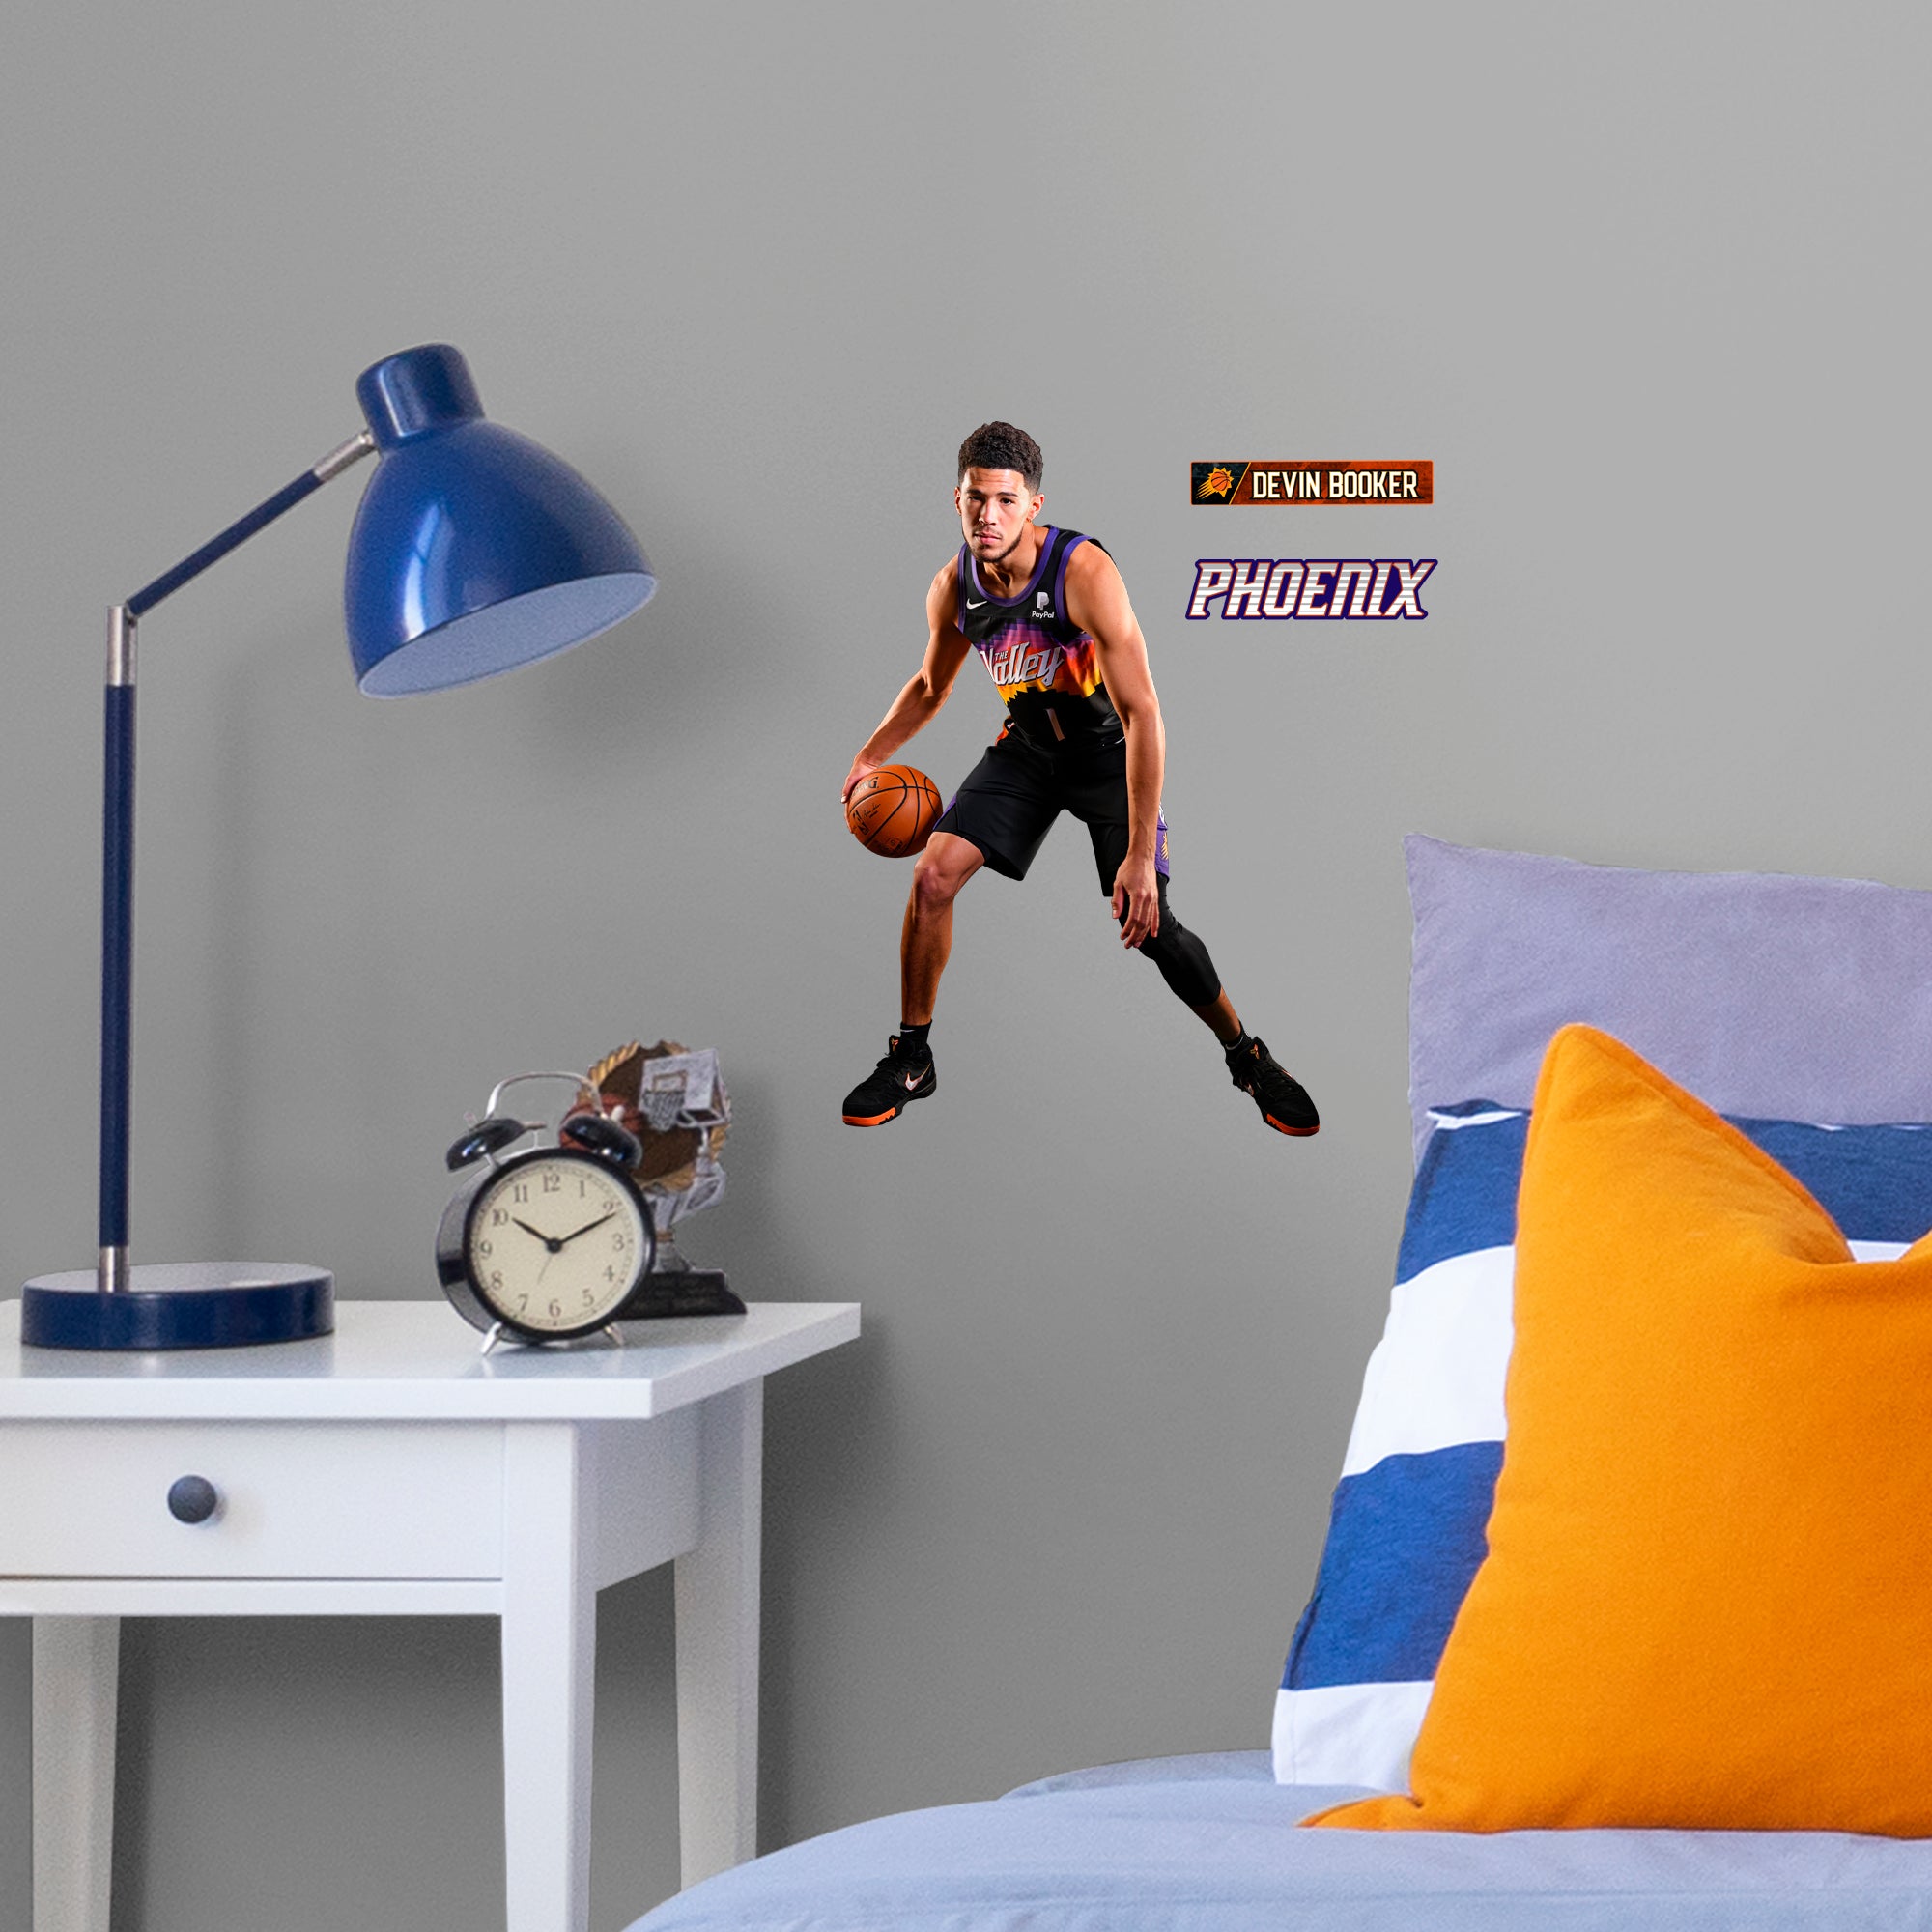 Devin Booker 2020 The Valley - Officially Licensed NBA Removable Wall Decal Large by Fathead | Vinyl